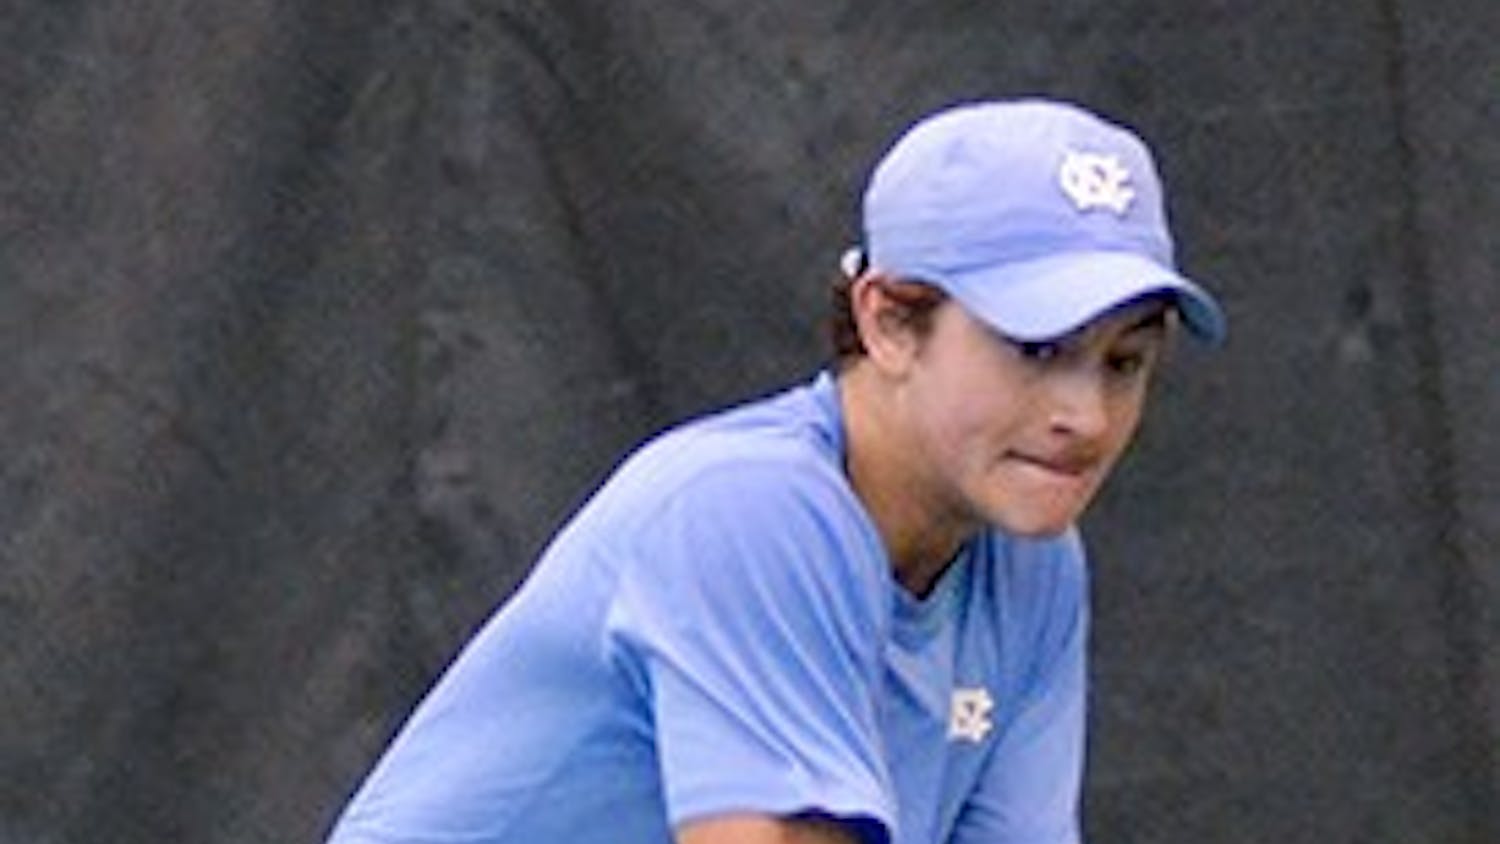 2-9 UNC vs TCU - UNC player Brayden Schnur returns Nick Chappell's (TCU) serve. Brayden finished the match with a 6-1, 3-6, 6-3 victory after breaking his opponent late in the third set.